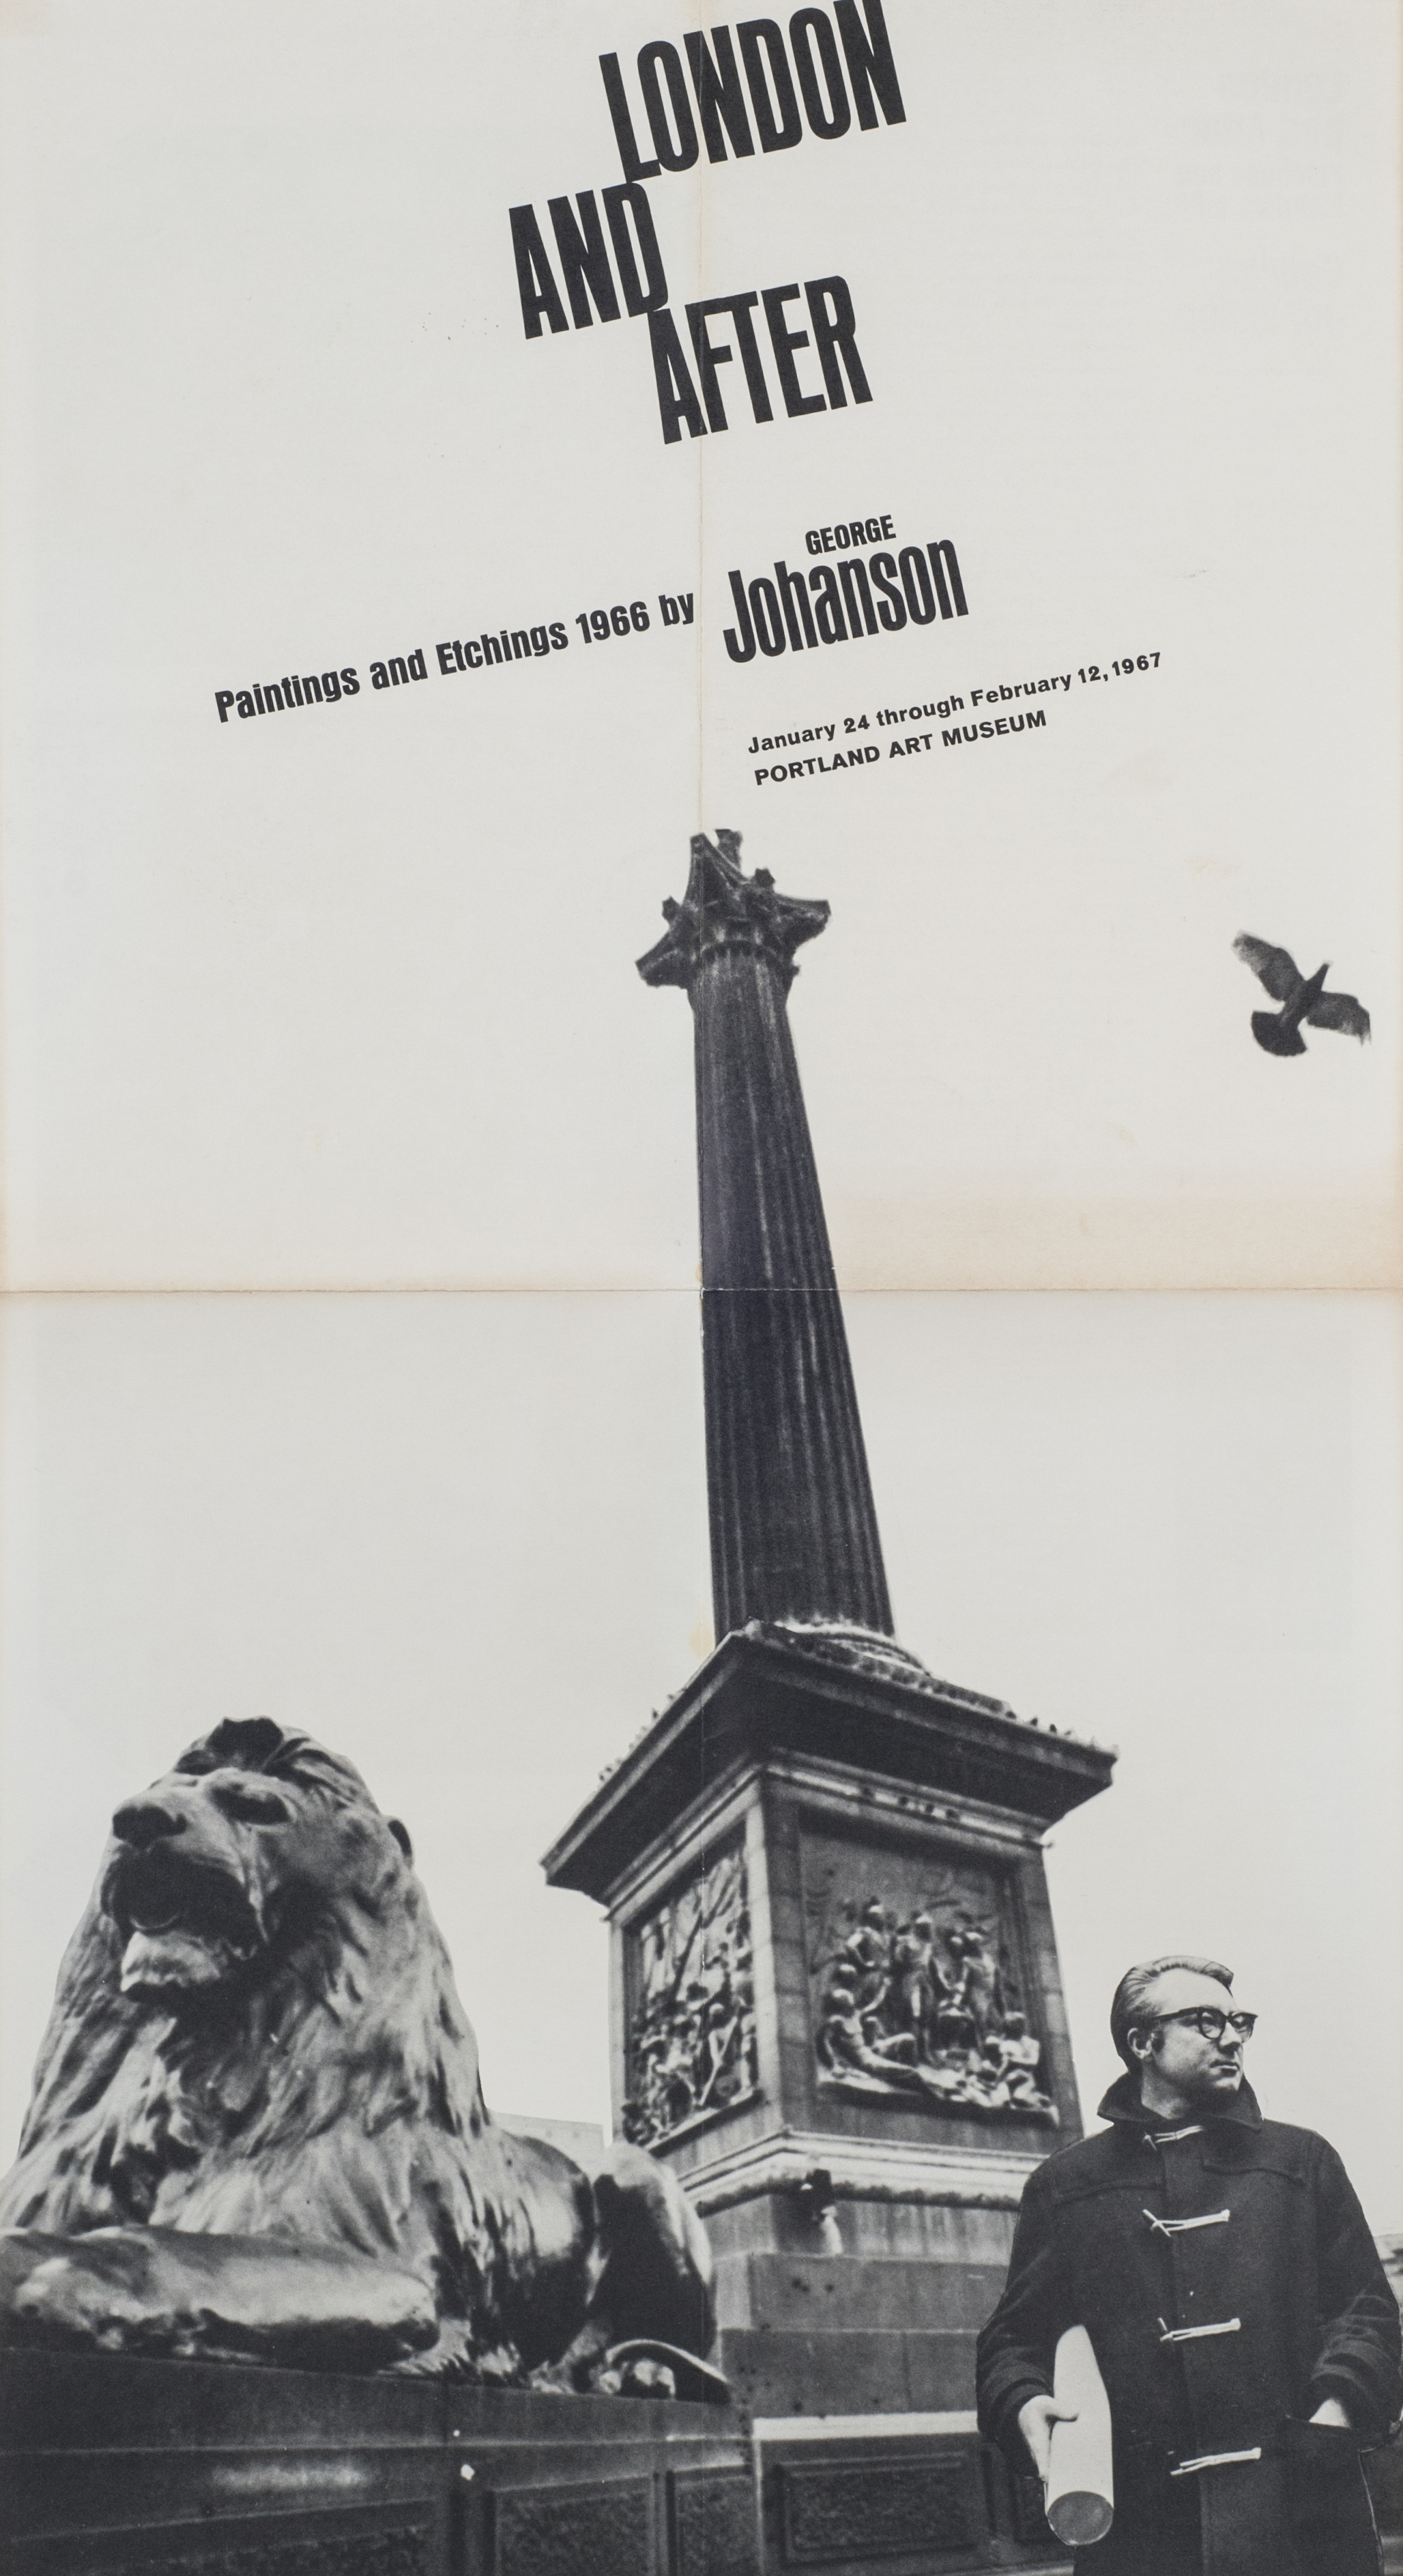 Poster for George Johanson exhibit showing column and lion monument from below